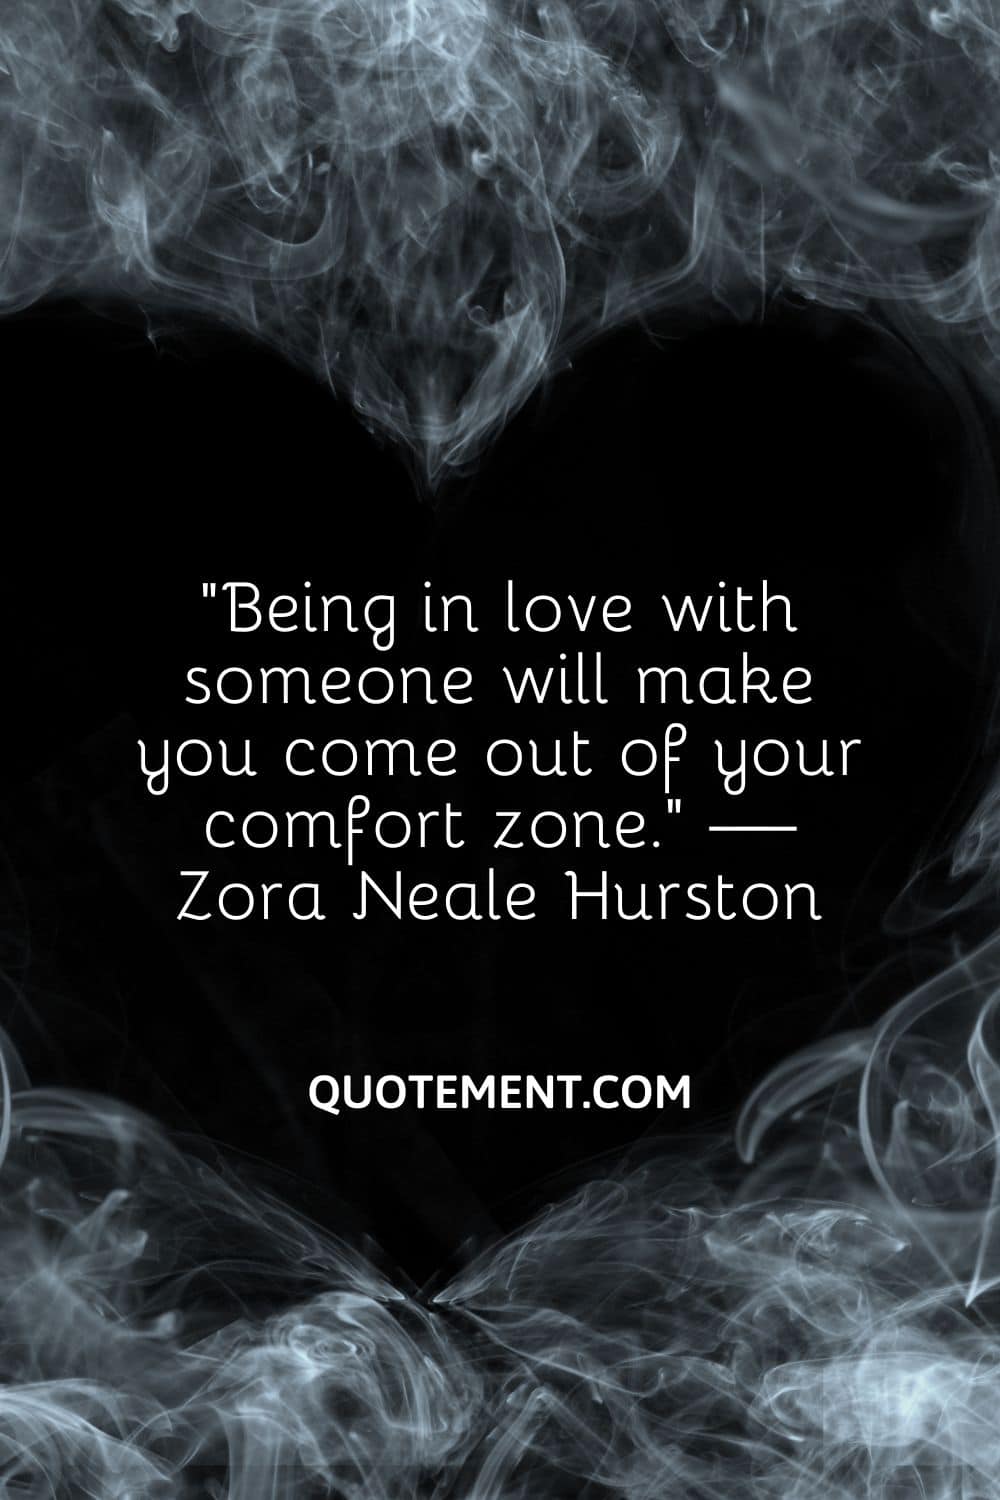 Being in love with someone will make you come out of your comfort zone